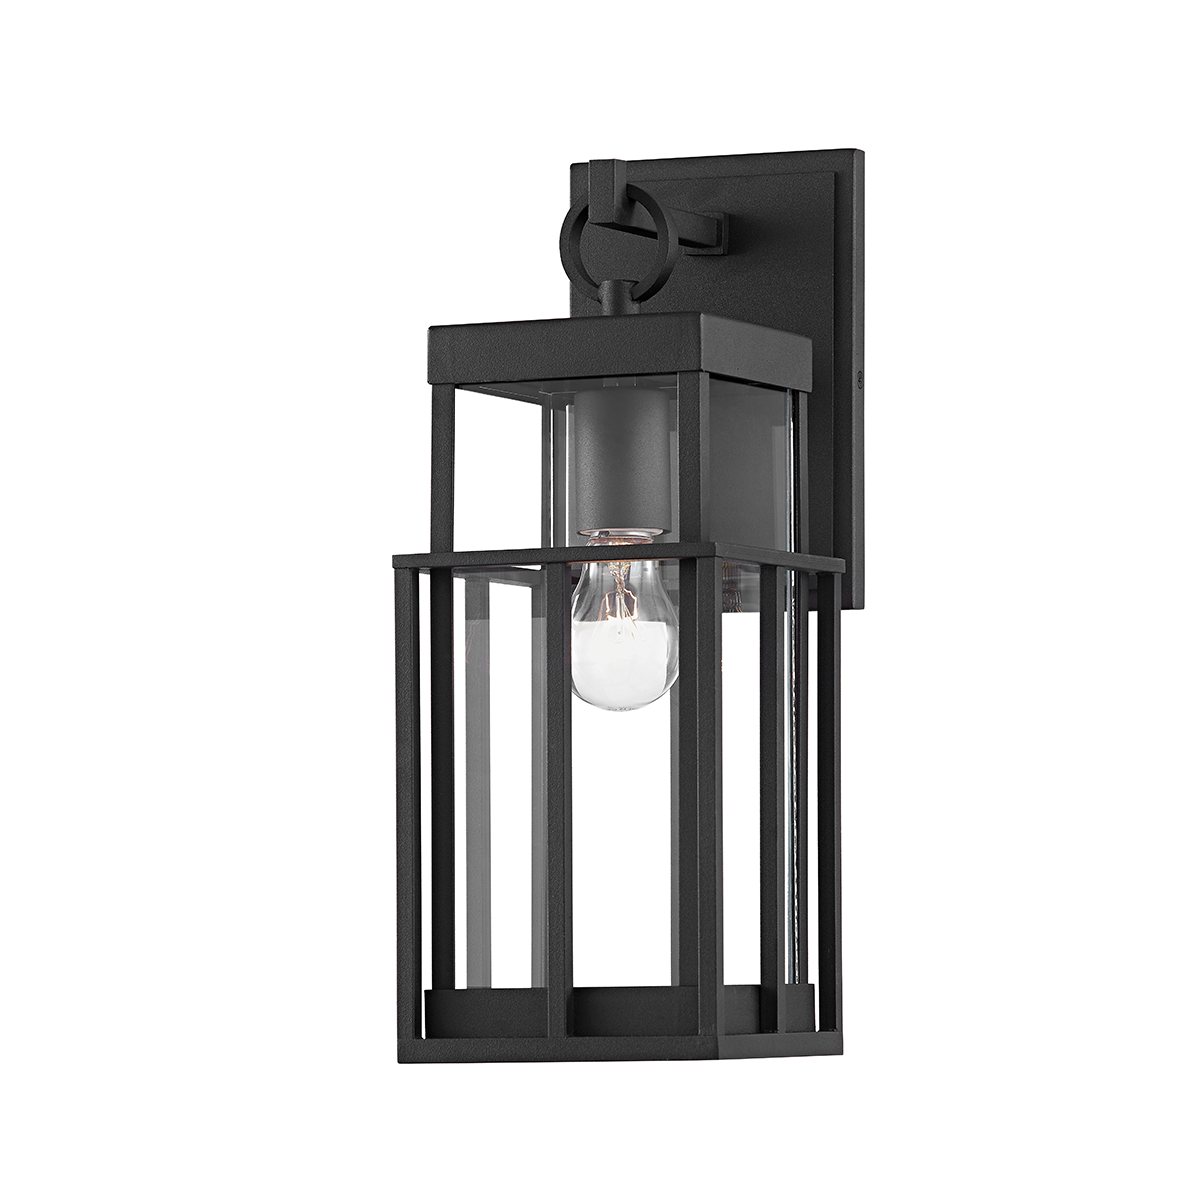 Troy LONGPORT 1 LIGHT SMALL EXTERIOR WALL SCONCE B6481 Outdoor l Wall Troy Lighting   